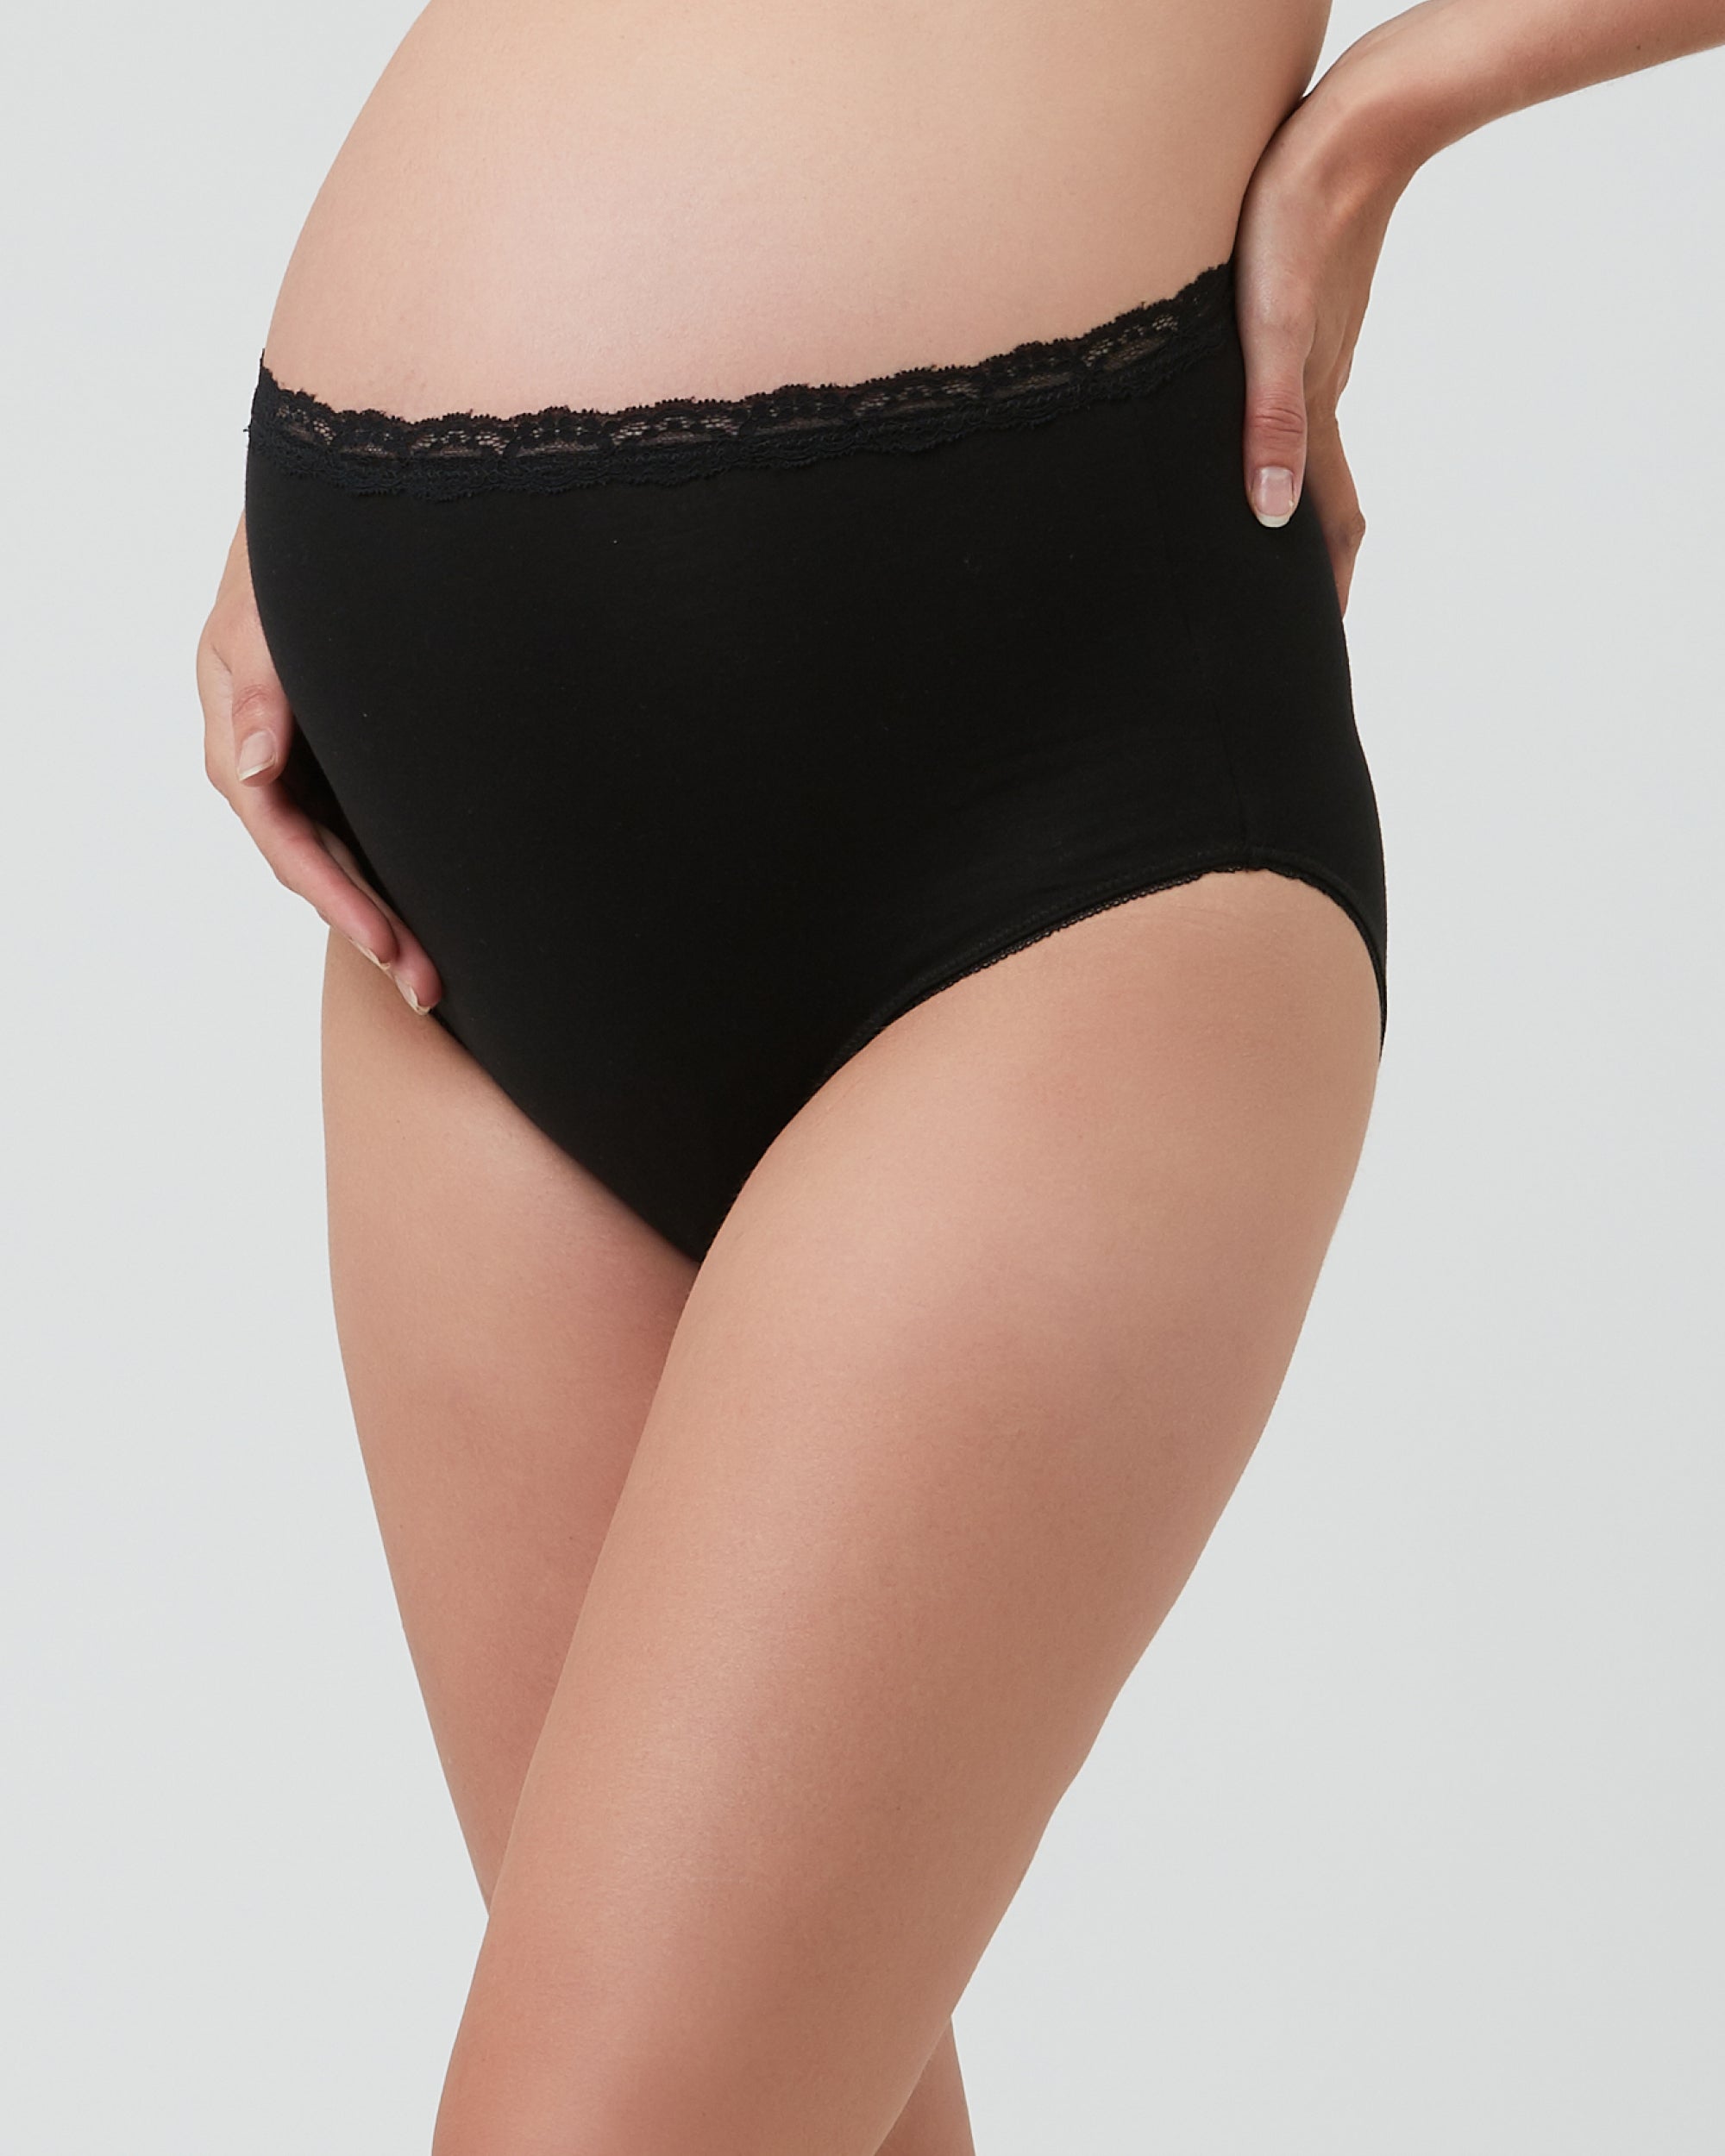 The 10 Best Pairs of Maternity Underwear